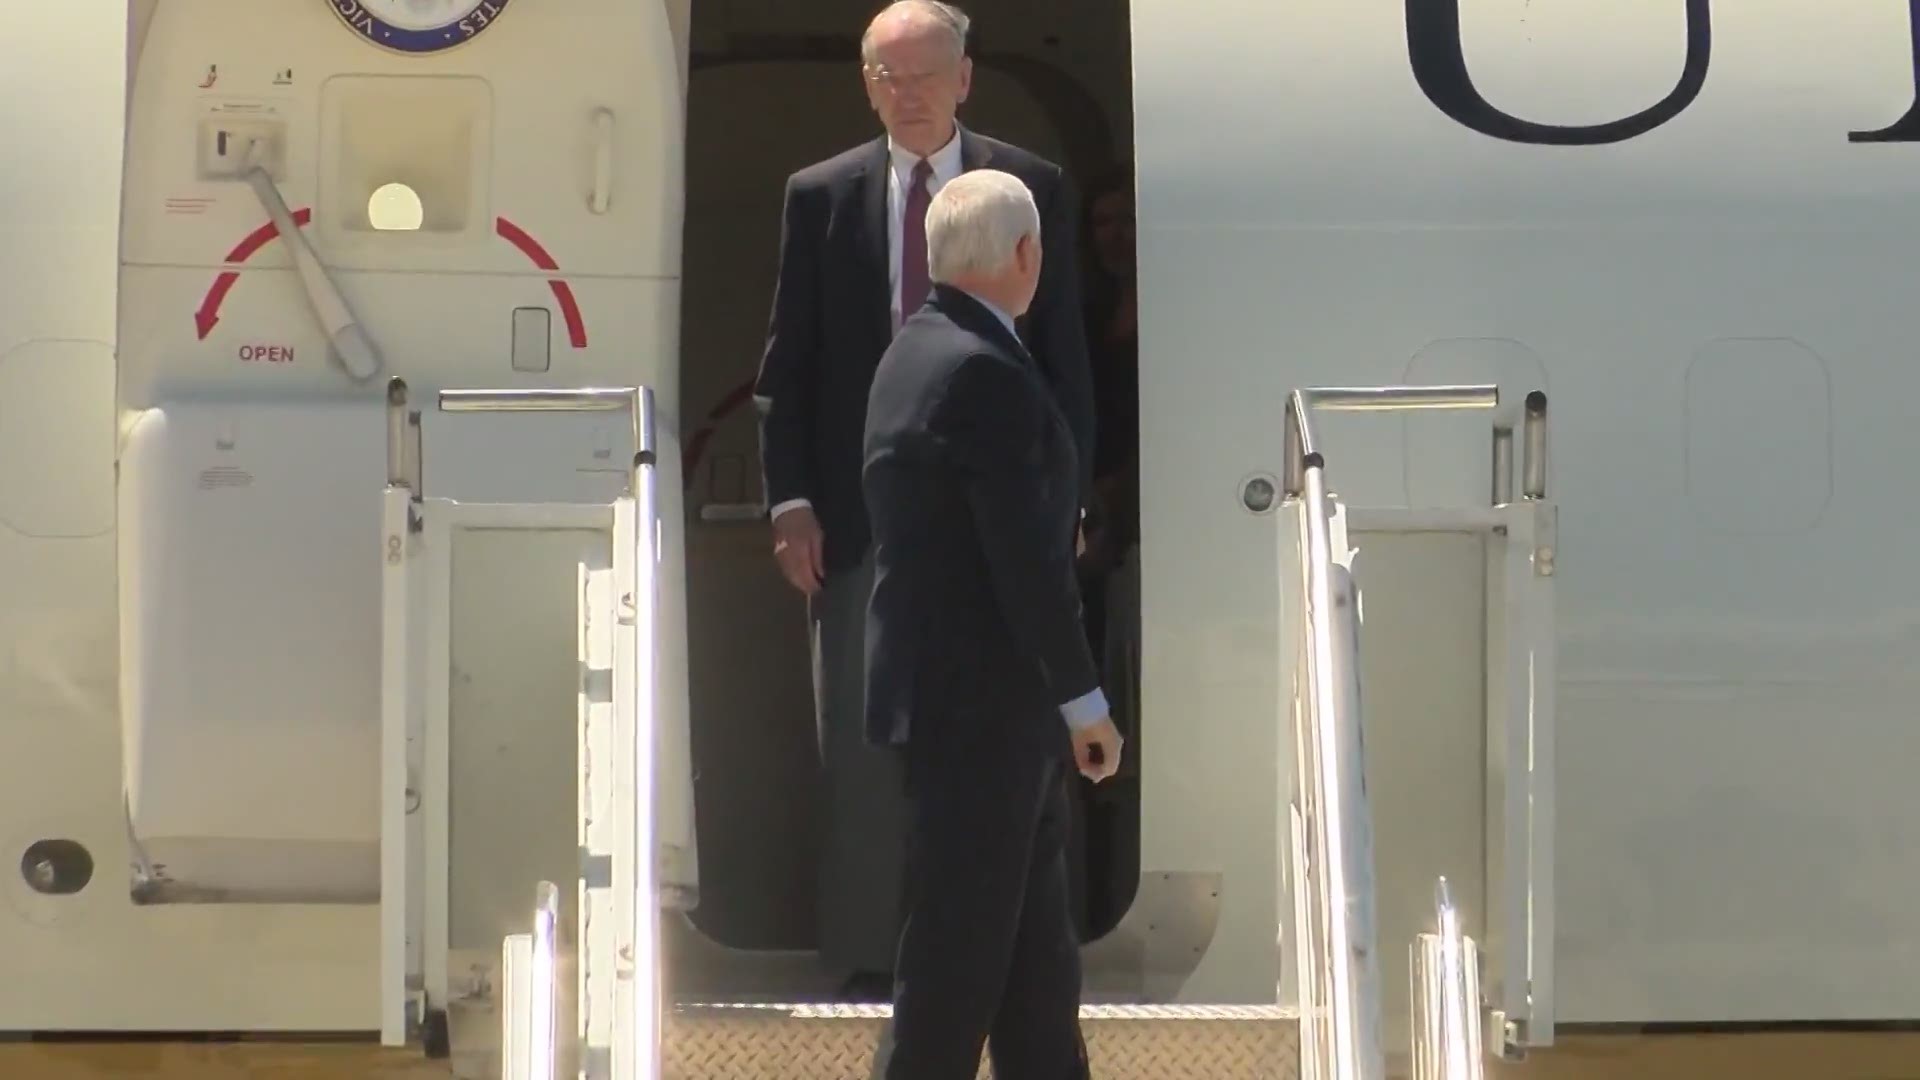 Vice President Pence, joined by senators Chuck Grassley and Joni Ernst, arrive in Iowa and are greeted by Gov. Kim Reynolds.